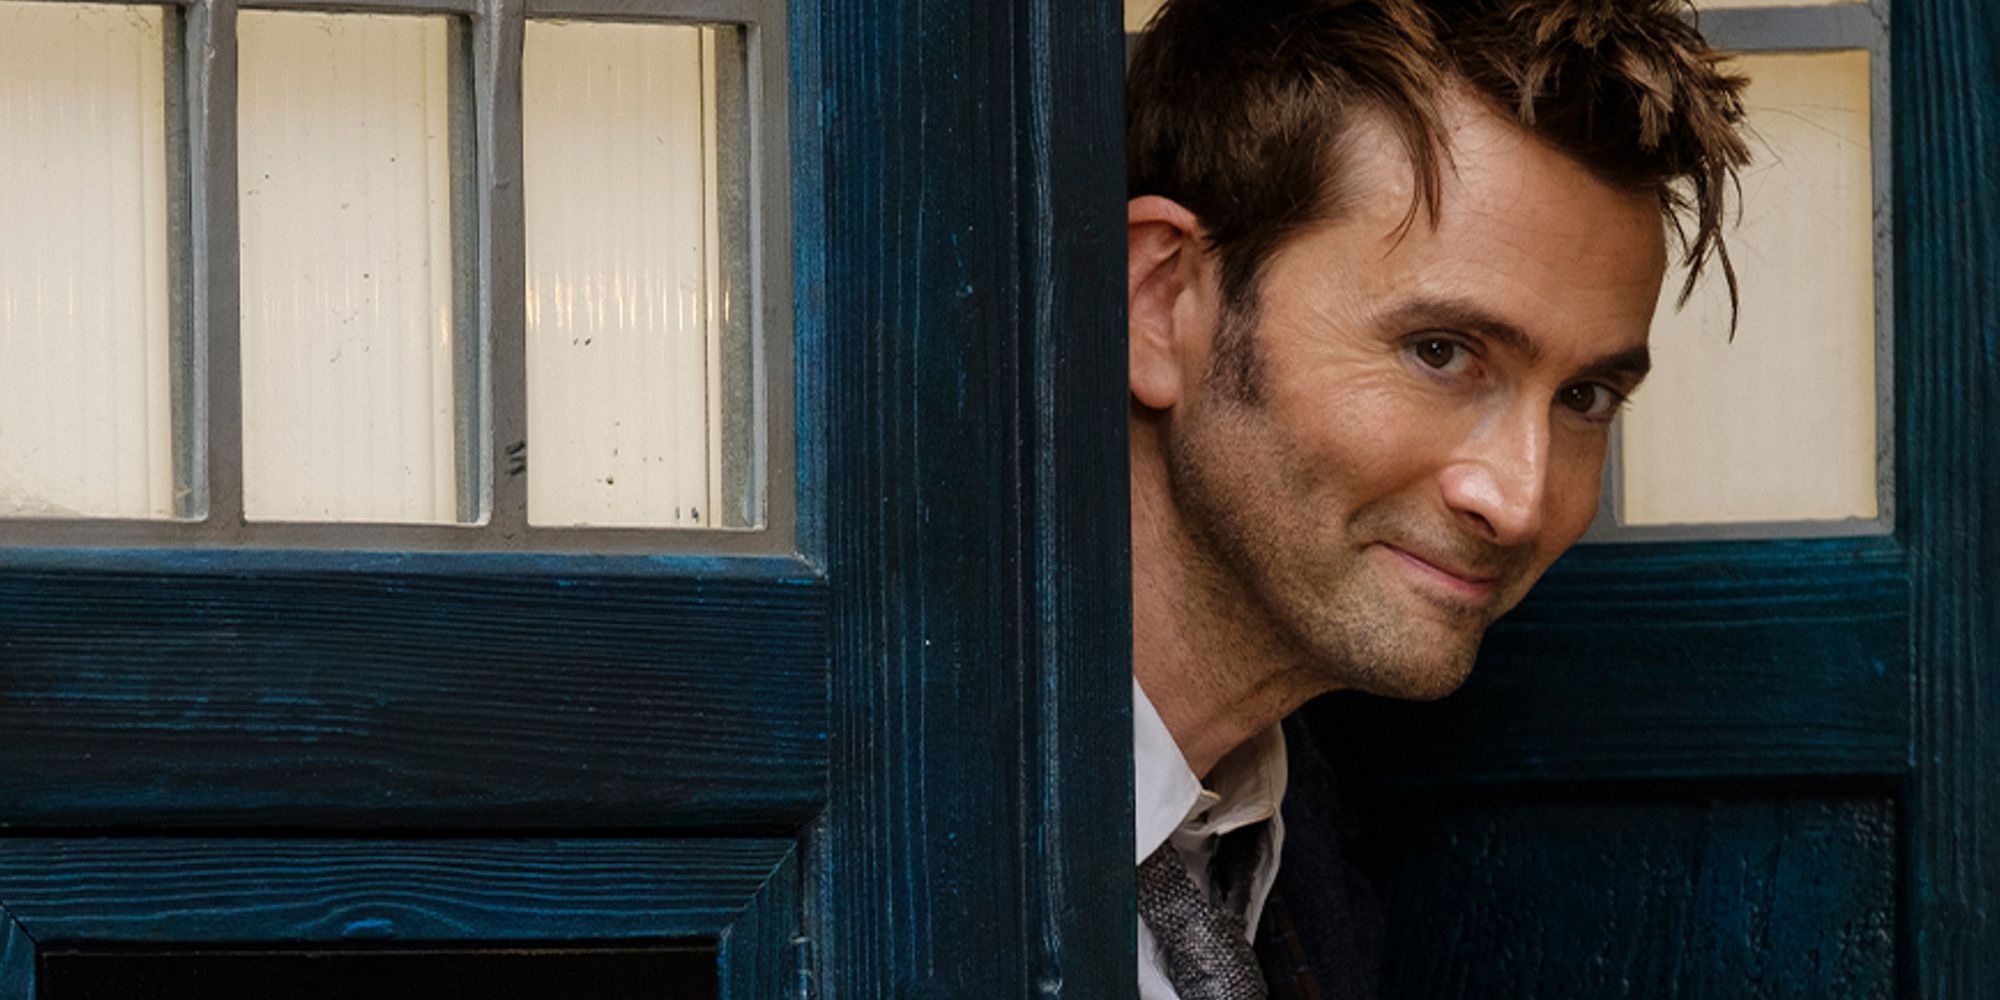 Doctor Who's David Tennant Returns As 14th Doctor In Celebratory New Image